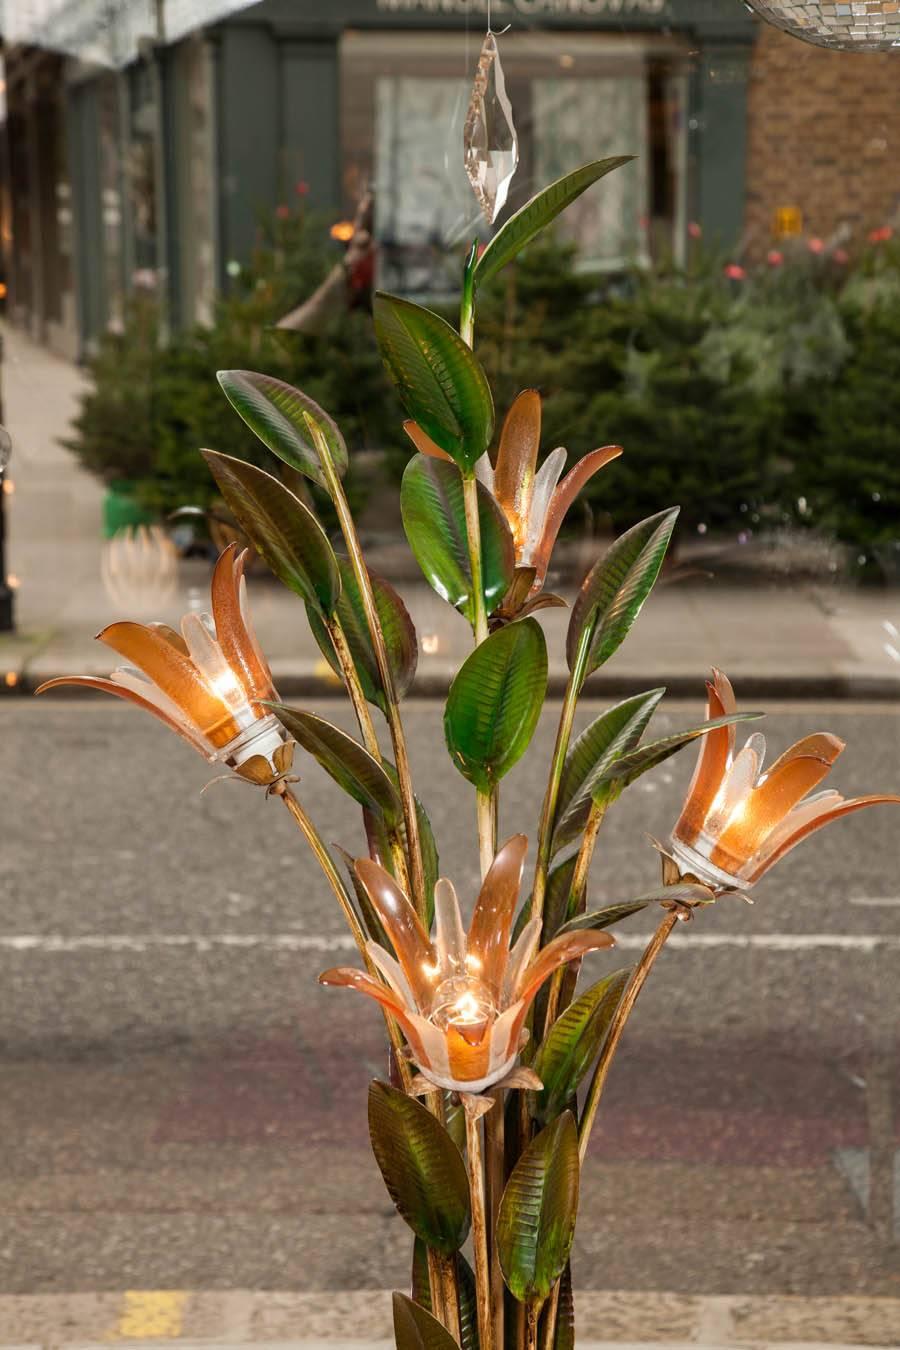 Unusual Standard Lamp of painted metal stalks with leaves supporting four hand-blown glass flowers in delicate shades of umber, standing on a twisting circular base.